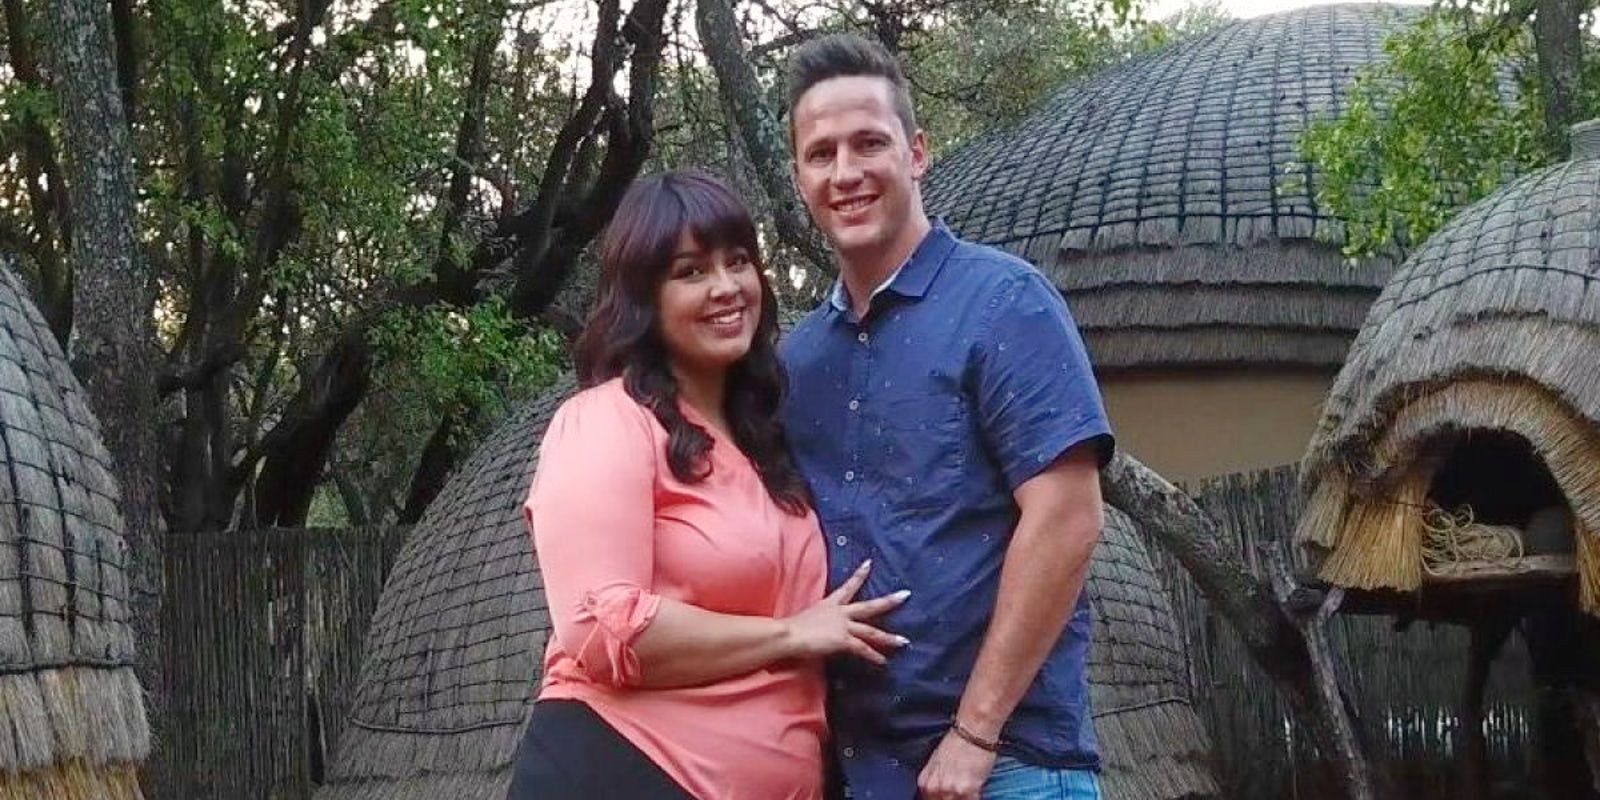 Tiffany Franco and Ronald Smith From 90 Day Fiancé